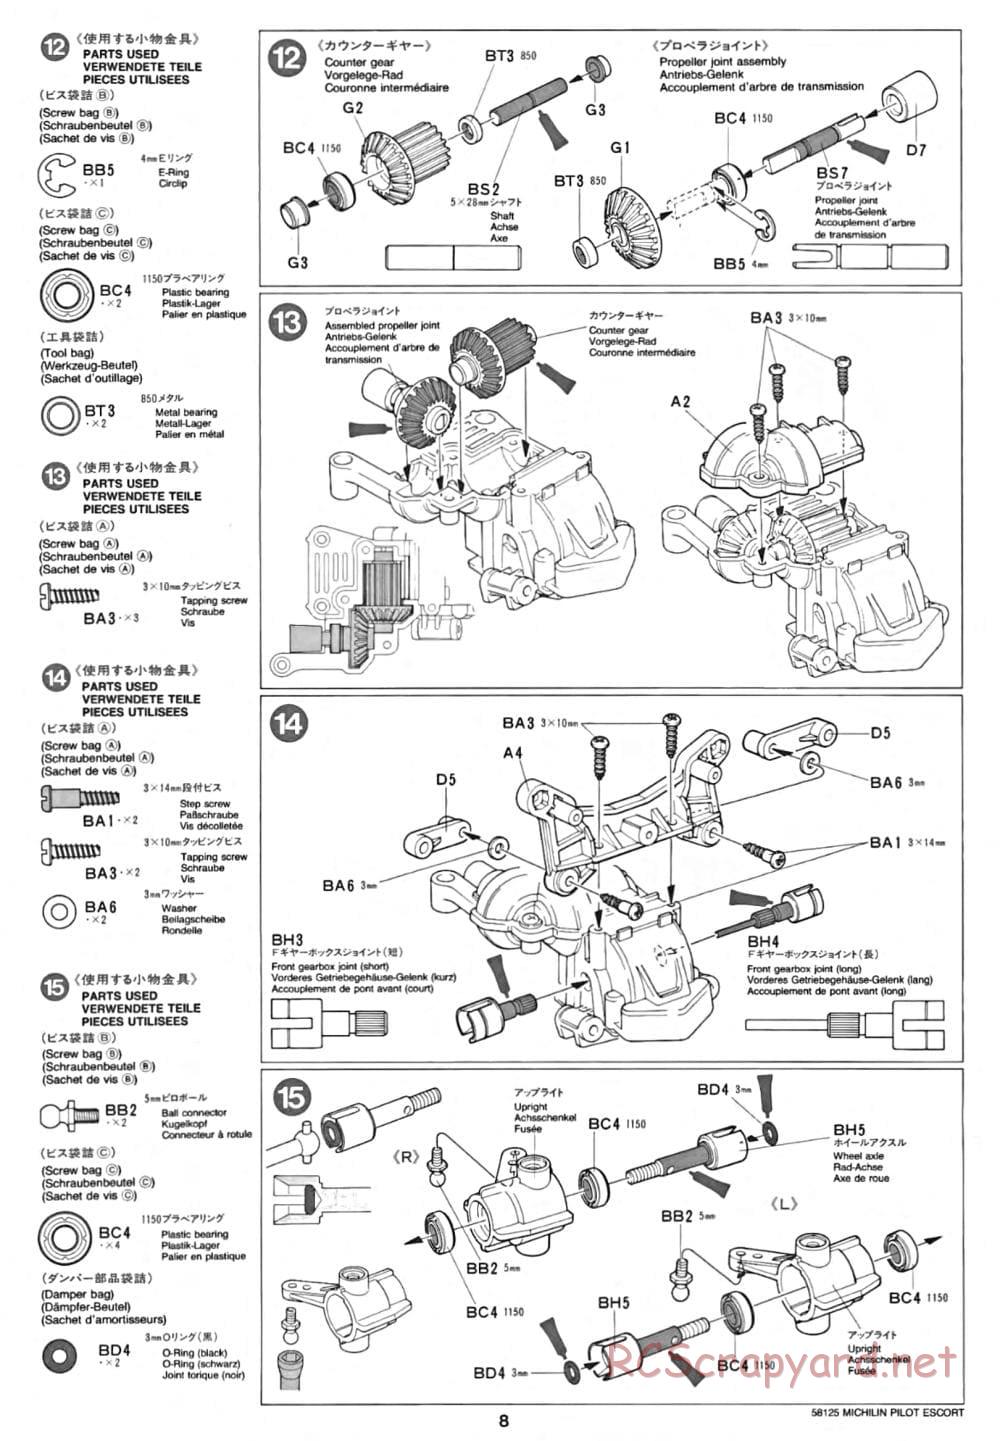 Tamiya - Michelin Pilot Ford Escort RS Cosworth - TA-01 Chassis - Manual - Page 8